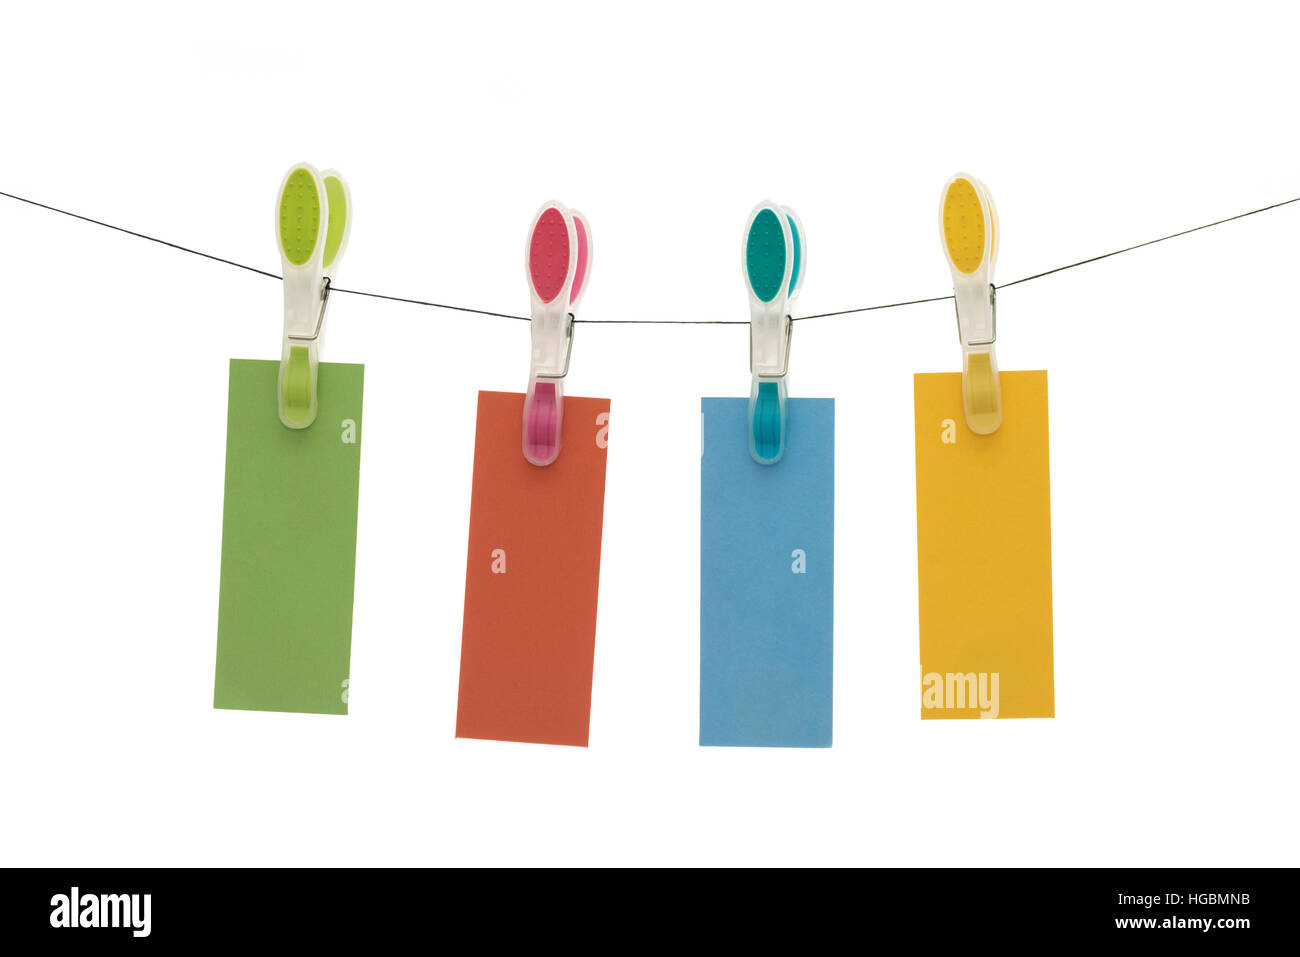 Hanging cards - four pieces of colored paper hanging from a line by clothes pegs Stock Photo